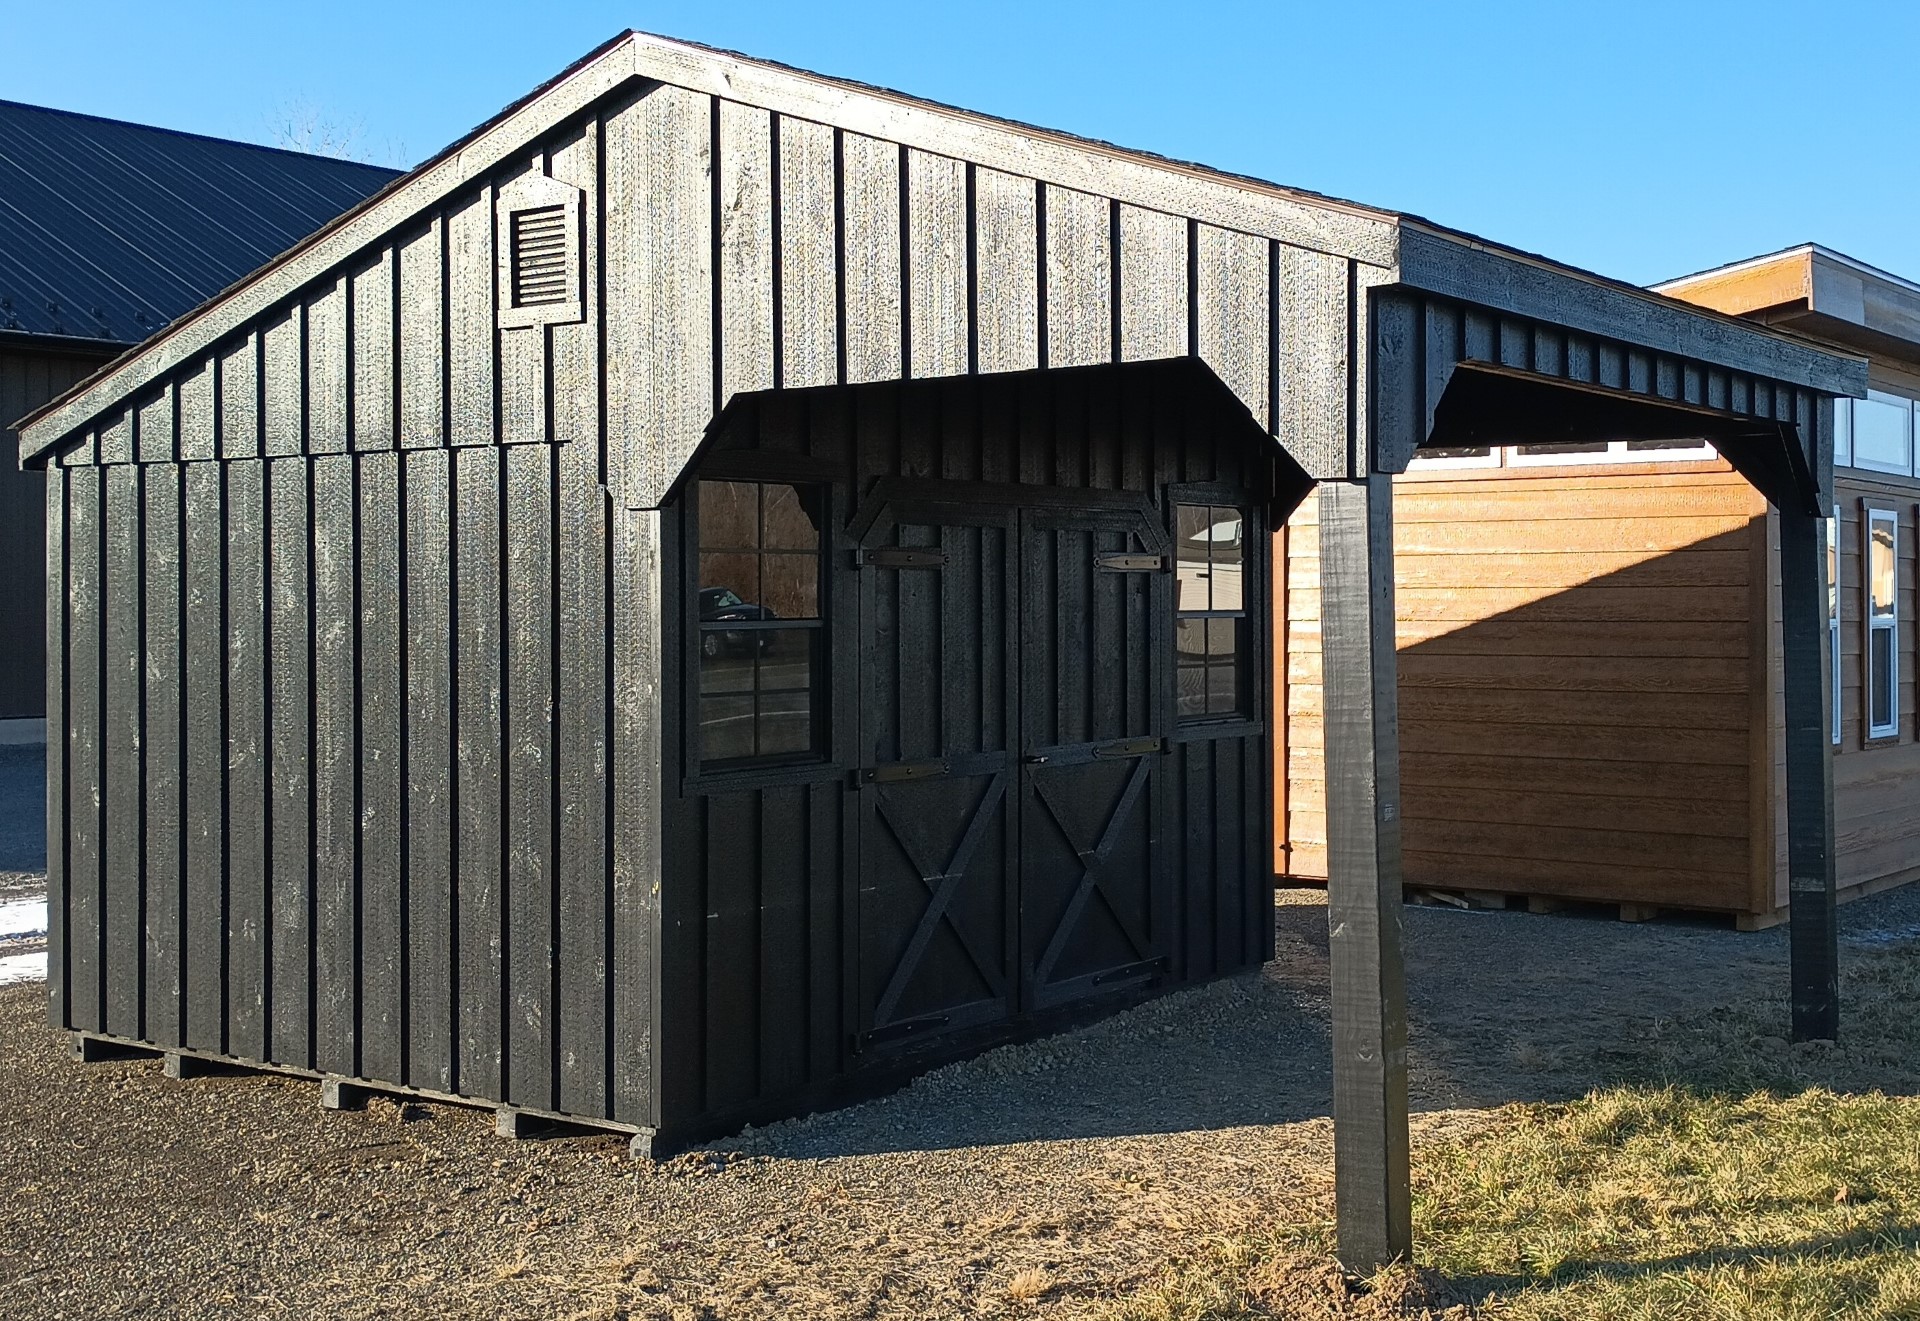 Board & Batten black shed with overhang on the front